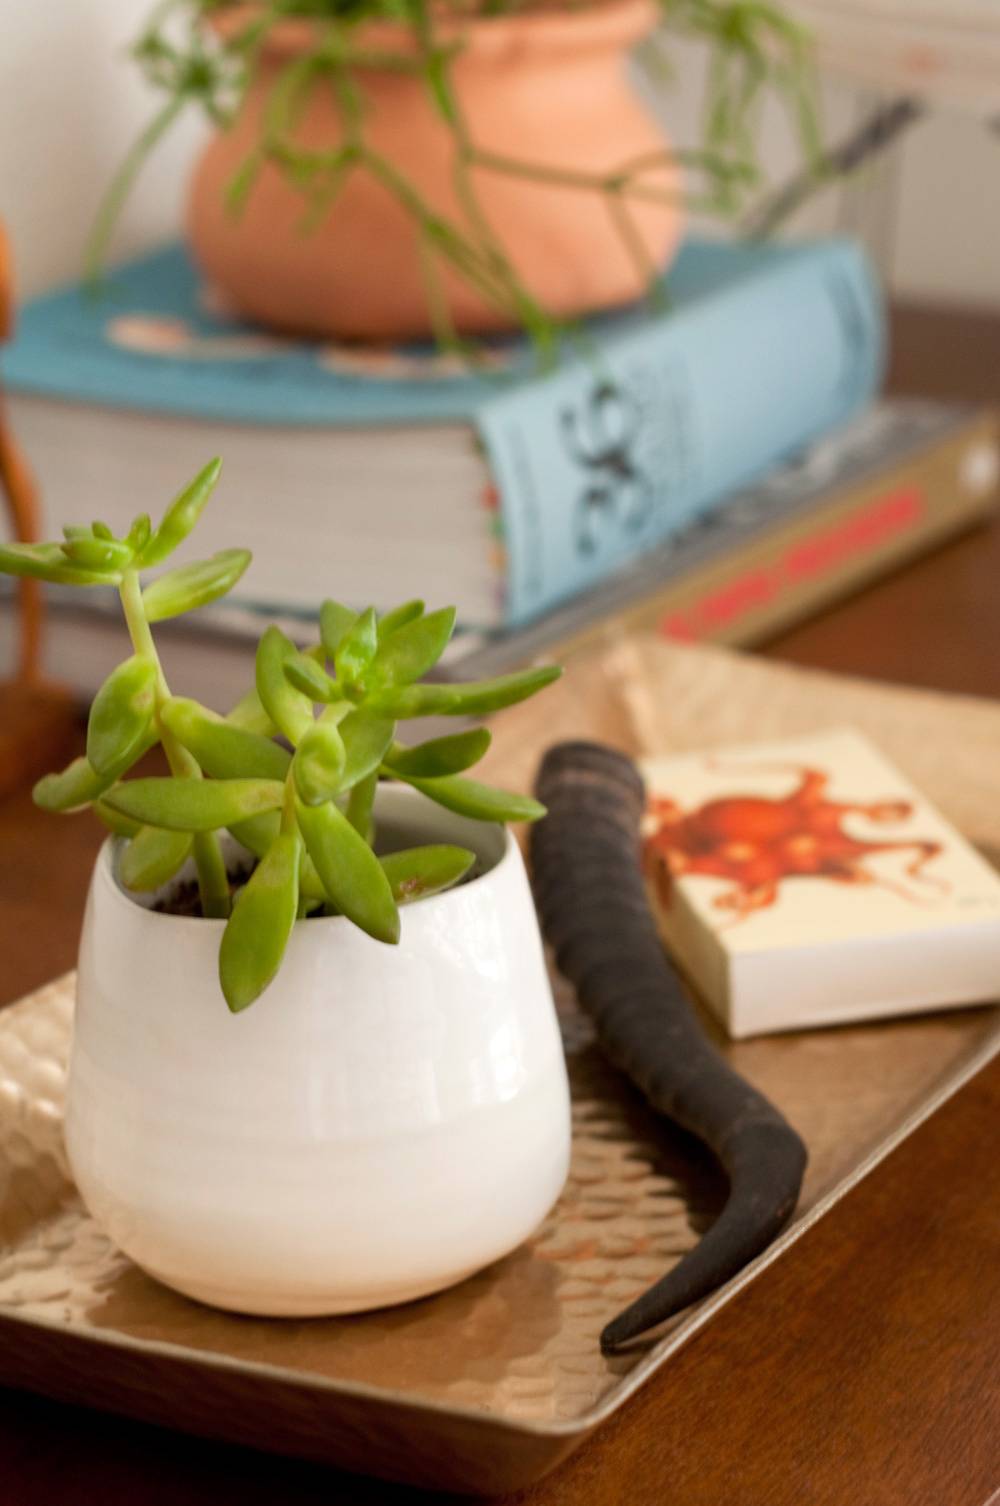 A white pot on a table next to a blue book with another plant on it